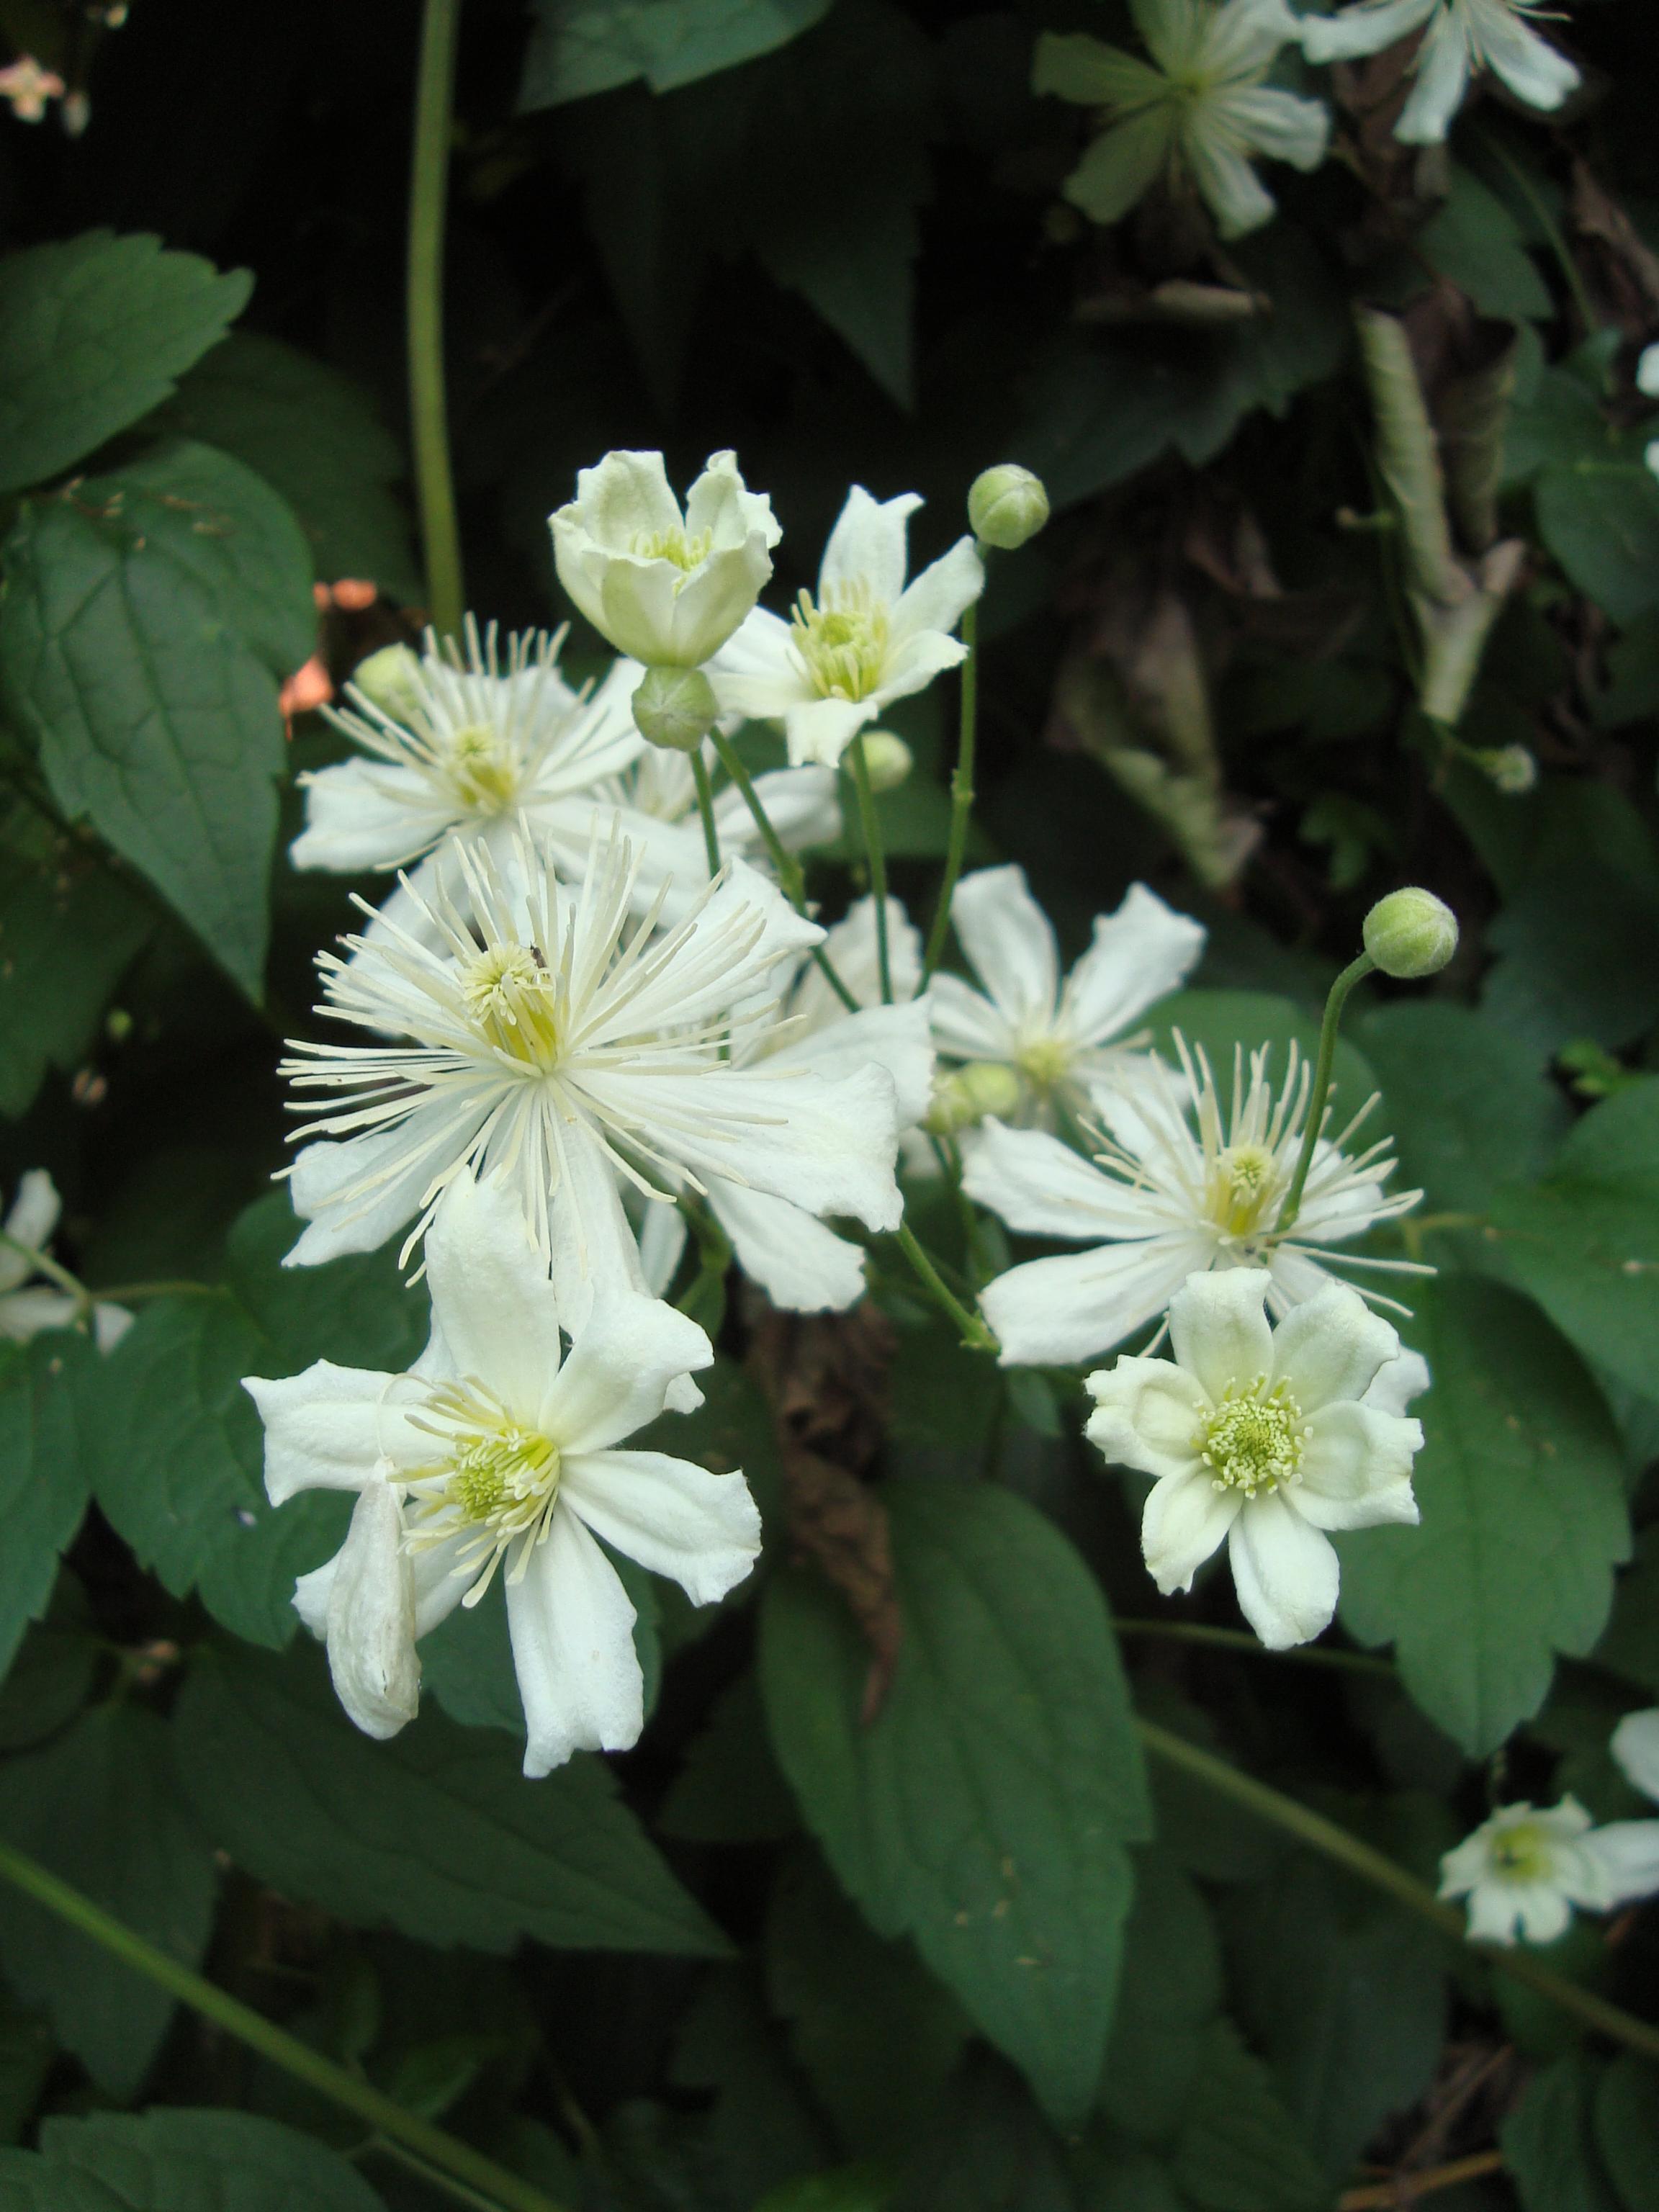 White flower with stigma, and white style, off-white stamen, lime-white buds, green leaves and stems.